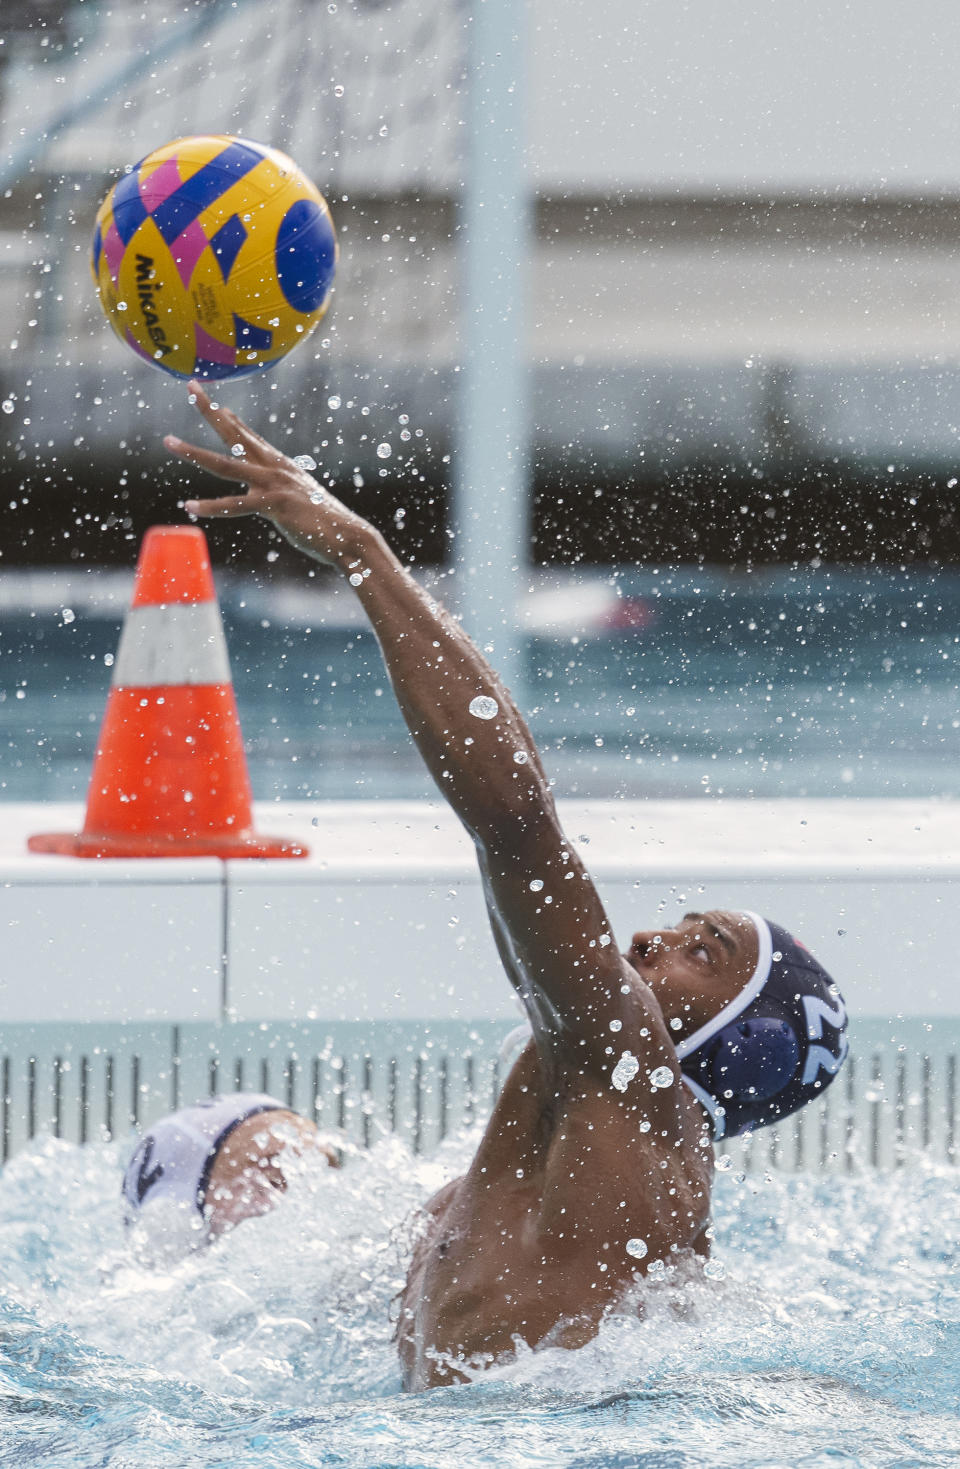 U.S. Olympic Water Polo Team attacker Max Irving, right, trains for the Paris Olympics, at Mt. San Antonio College in Walnut, Calif., on Wednesday, Jan. 17, 2024. Irving's father, Michael Irving, is a Pac-12 college basketball referee. Max Irving is also the only Black man on the U.S. Olympic Water Polo Team and a prominent advocate for diversity in the sport. (AP Photo/Damian Dovarganes)